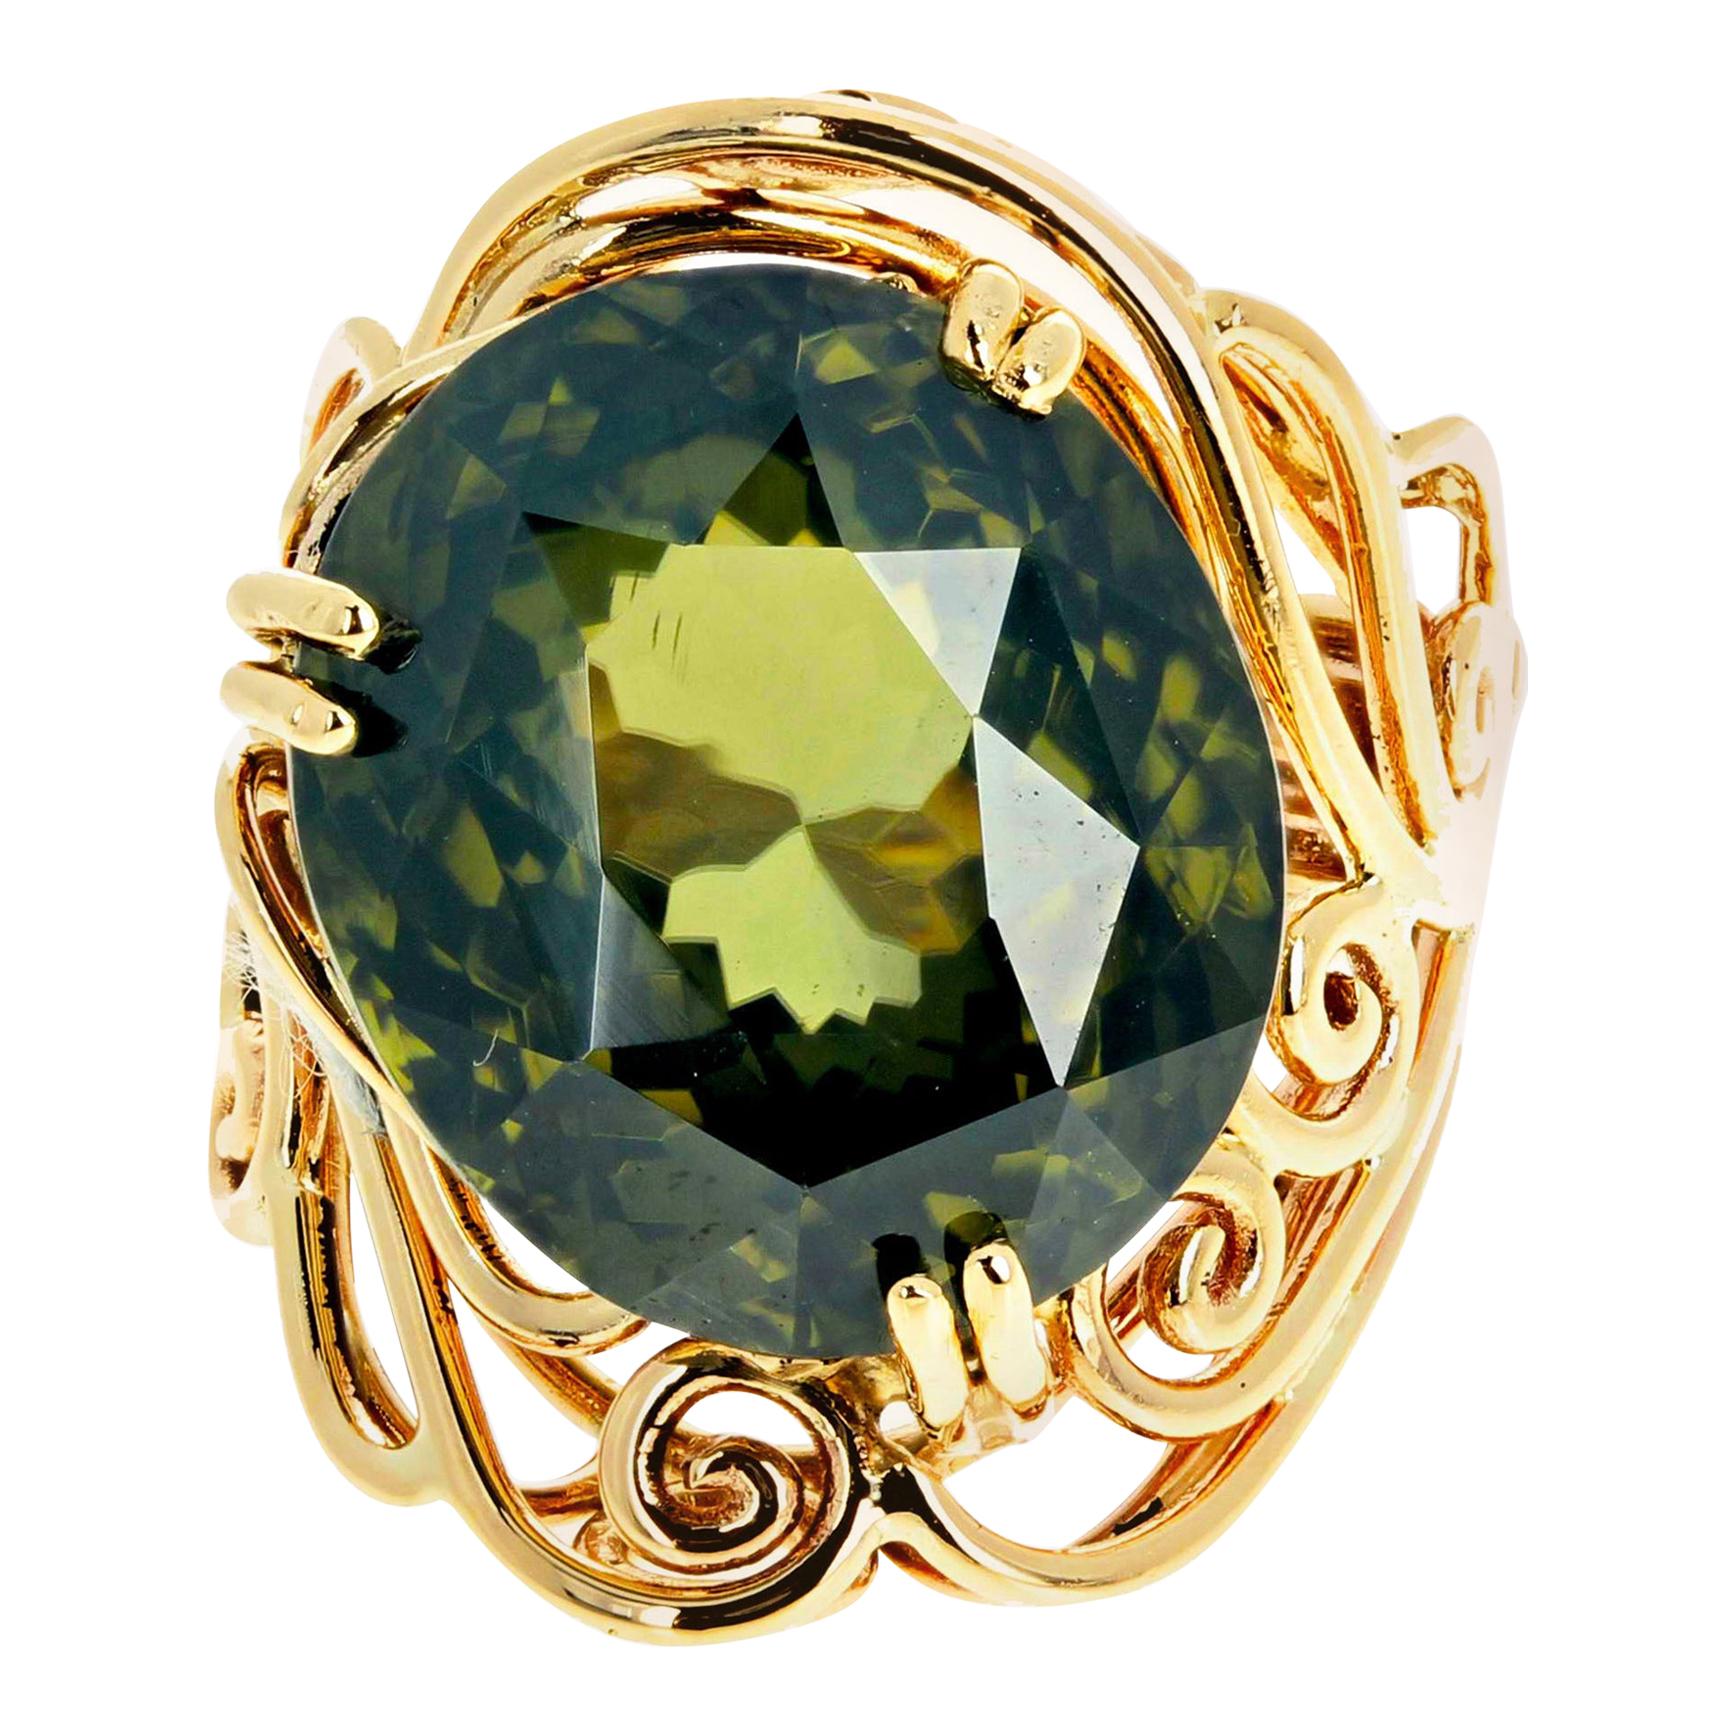 AJD Rare ENORMOUS Gemstone 19.4 Ct Natural Green Zircon Yellow Gold Ring For Sale